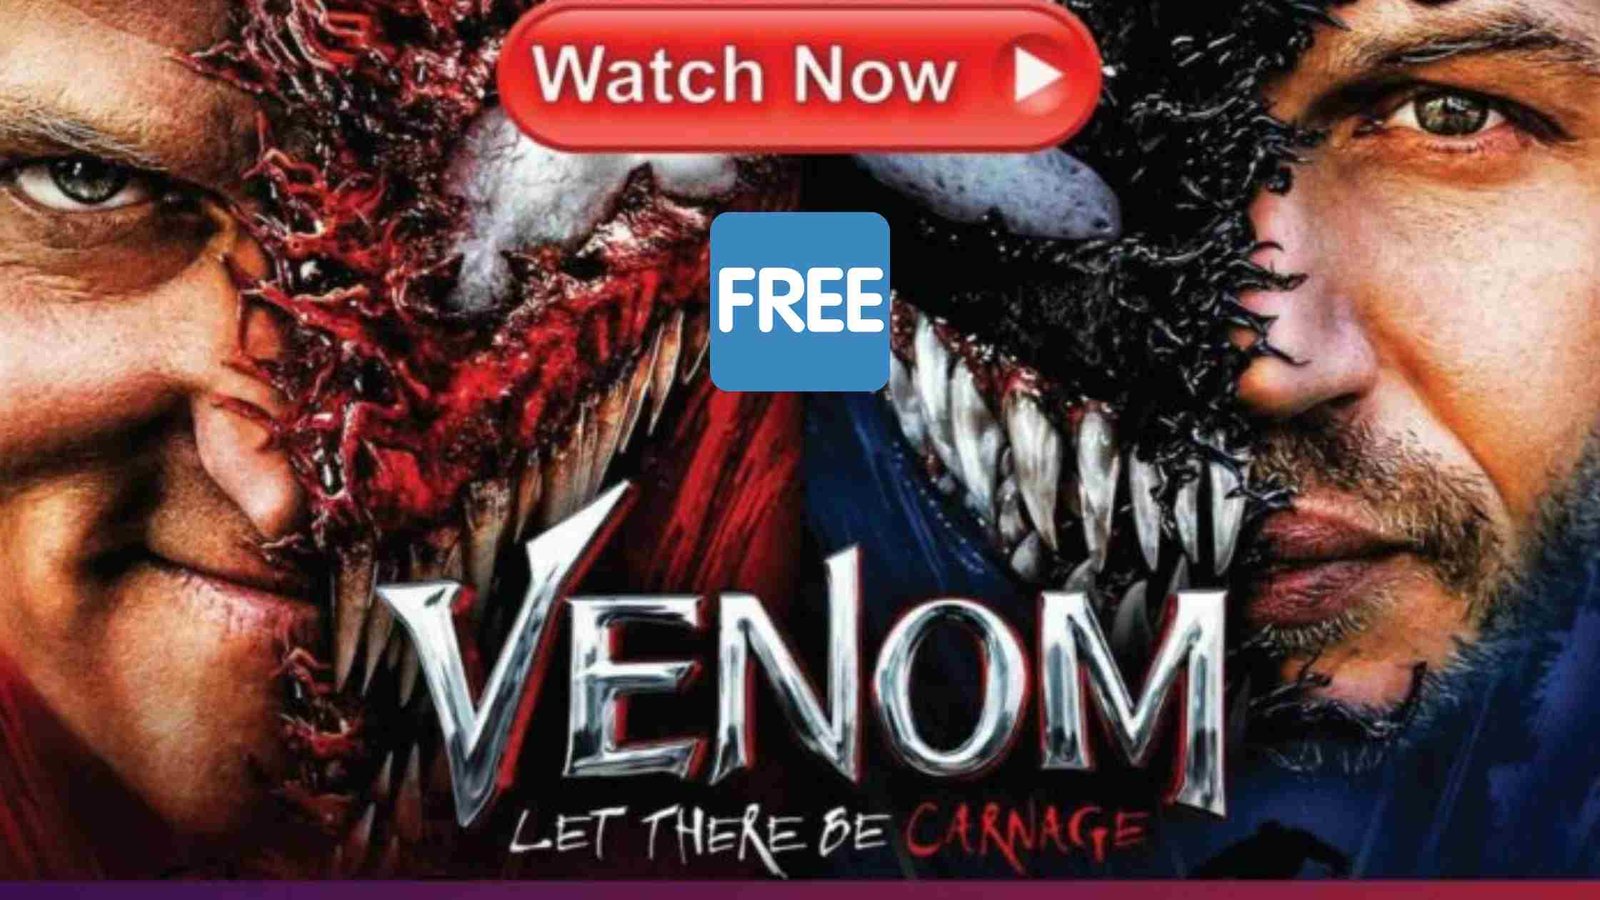 watch venom let there be carnage for free